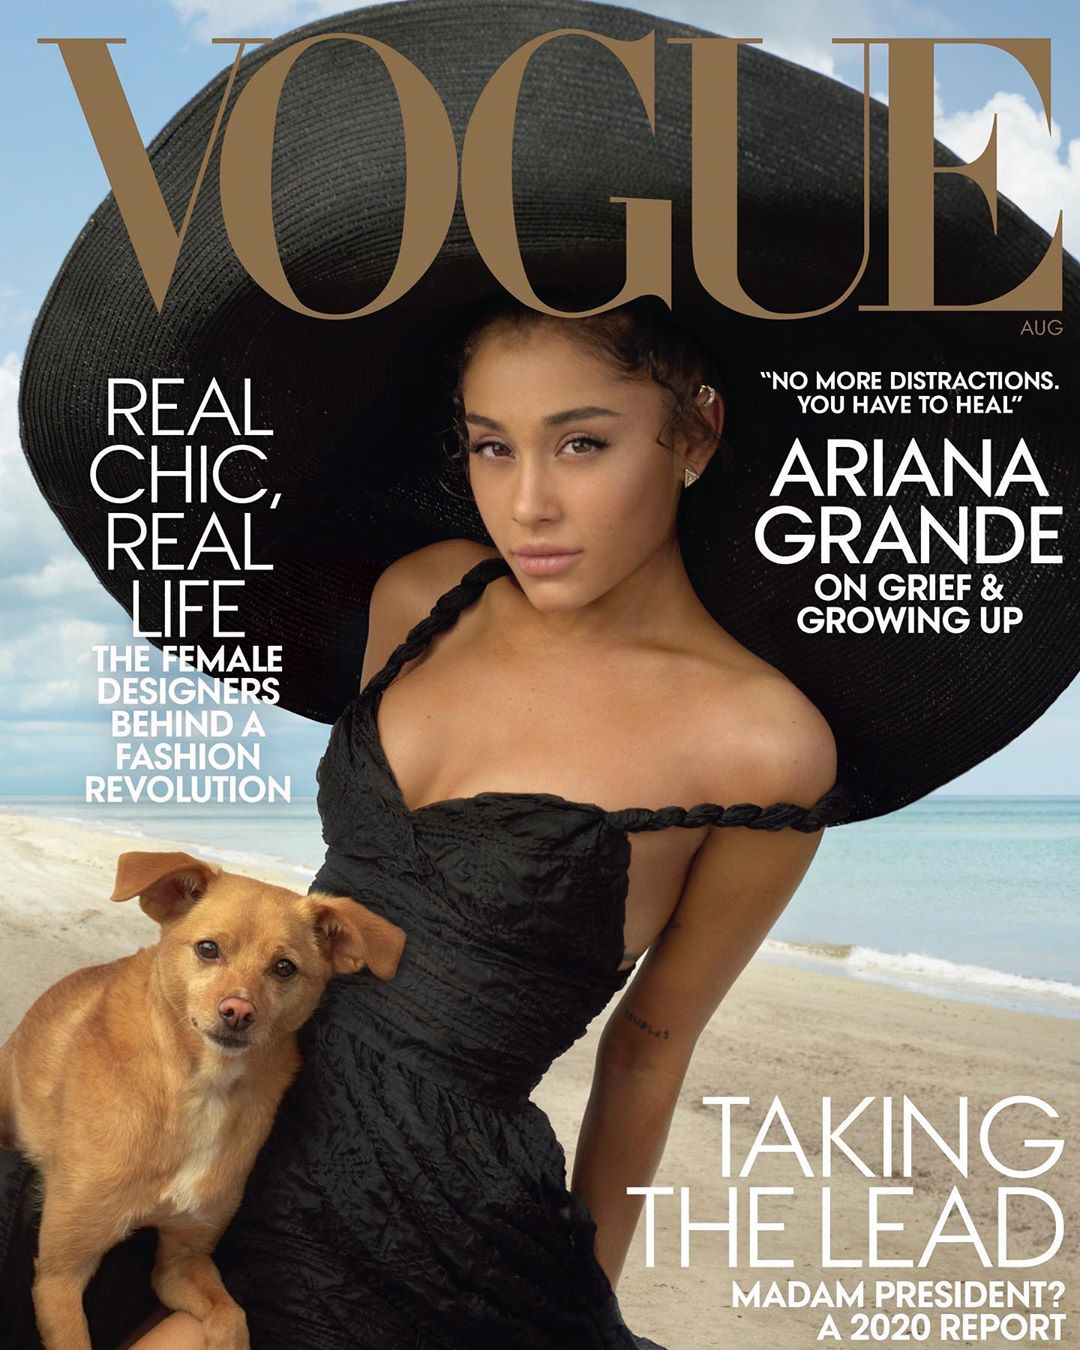 Ariana Grande opens up about Mac Miller and Pete Davidson in Vogue